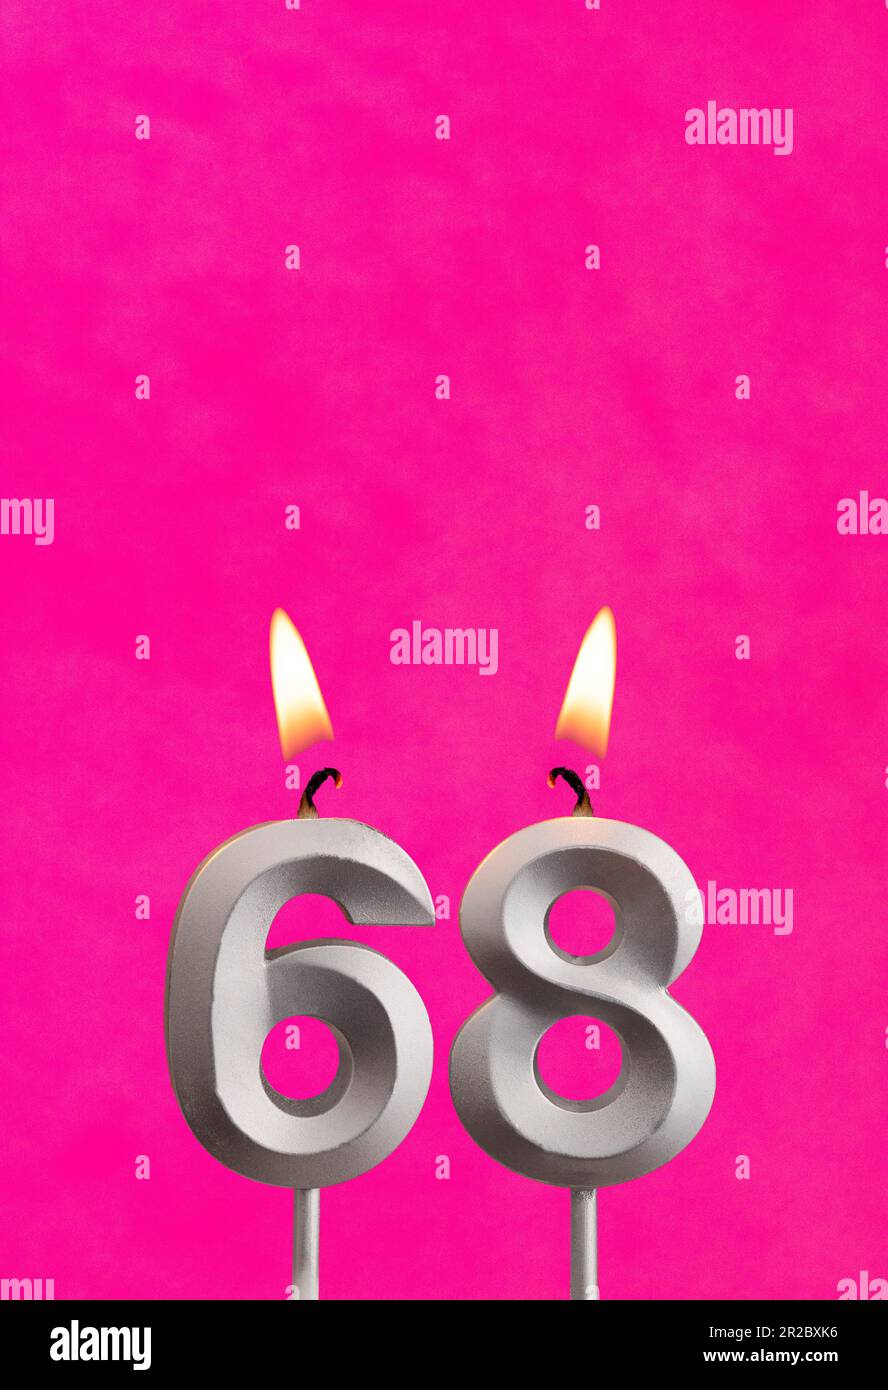 Candle 68 with flame - Silver anniversary candle on a fuchsia background Stock Photo